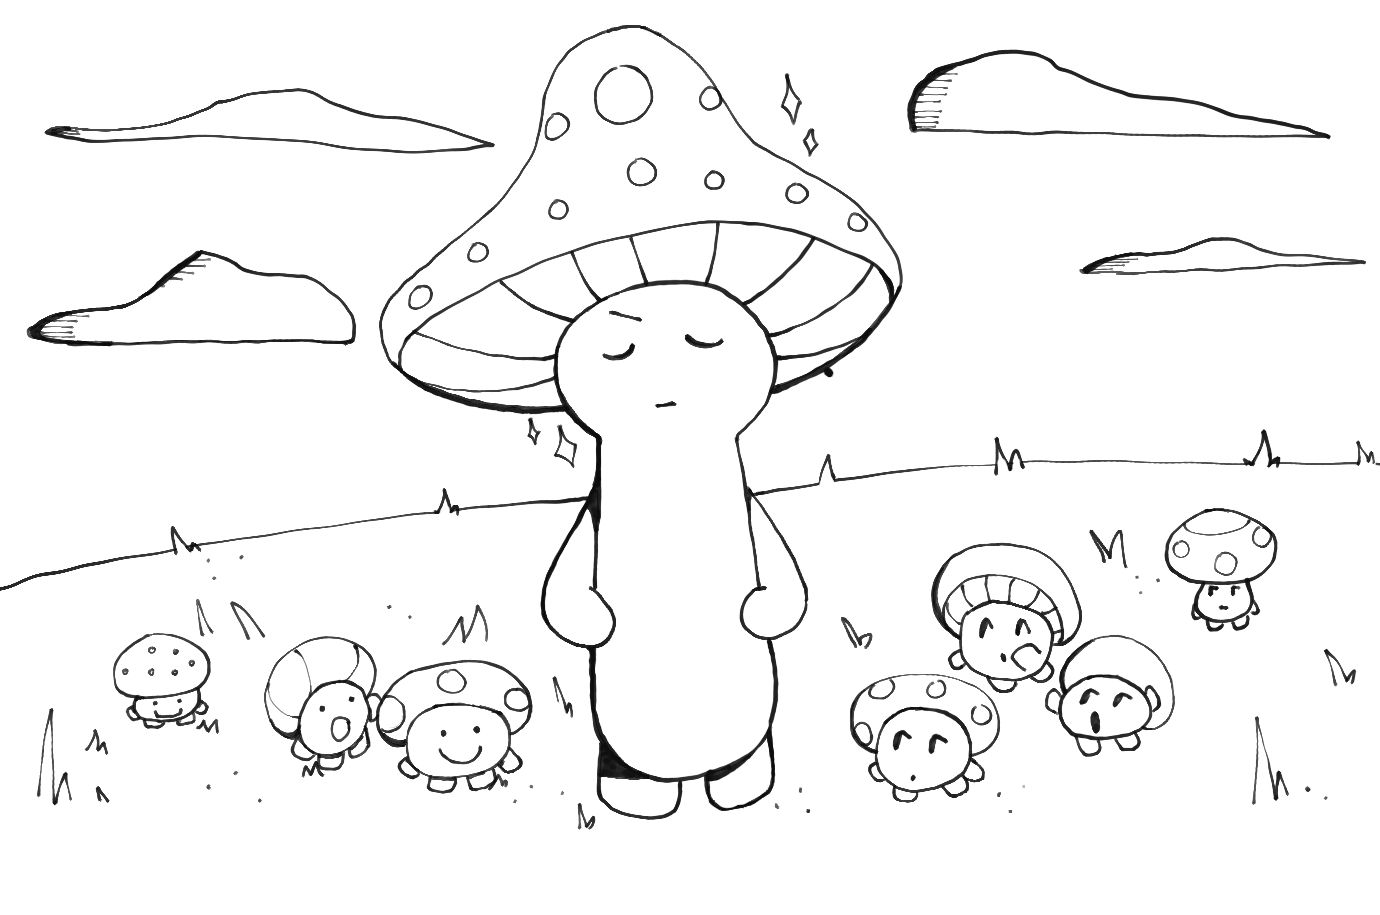 An image of a proud and tough looking mushroom person with little mushroom people following them.